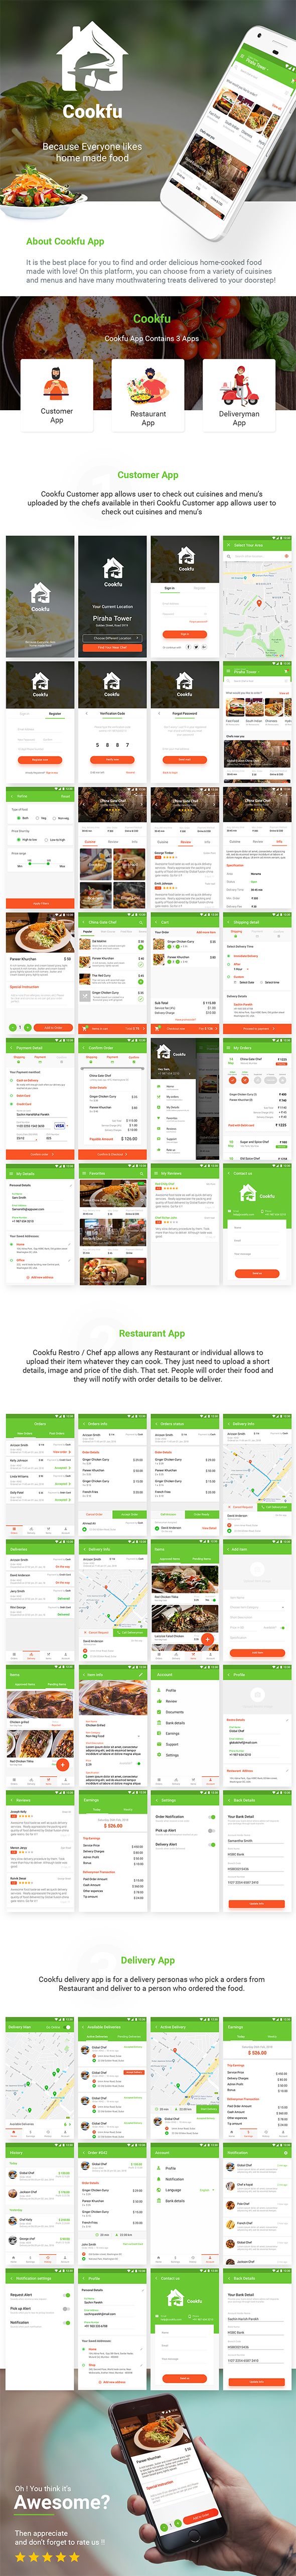 Multi Restaurant Food Delivery & Ordering Android App Template|3 Apps| Cookfu (XML Code) - 2